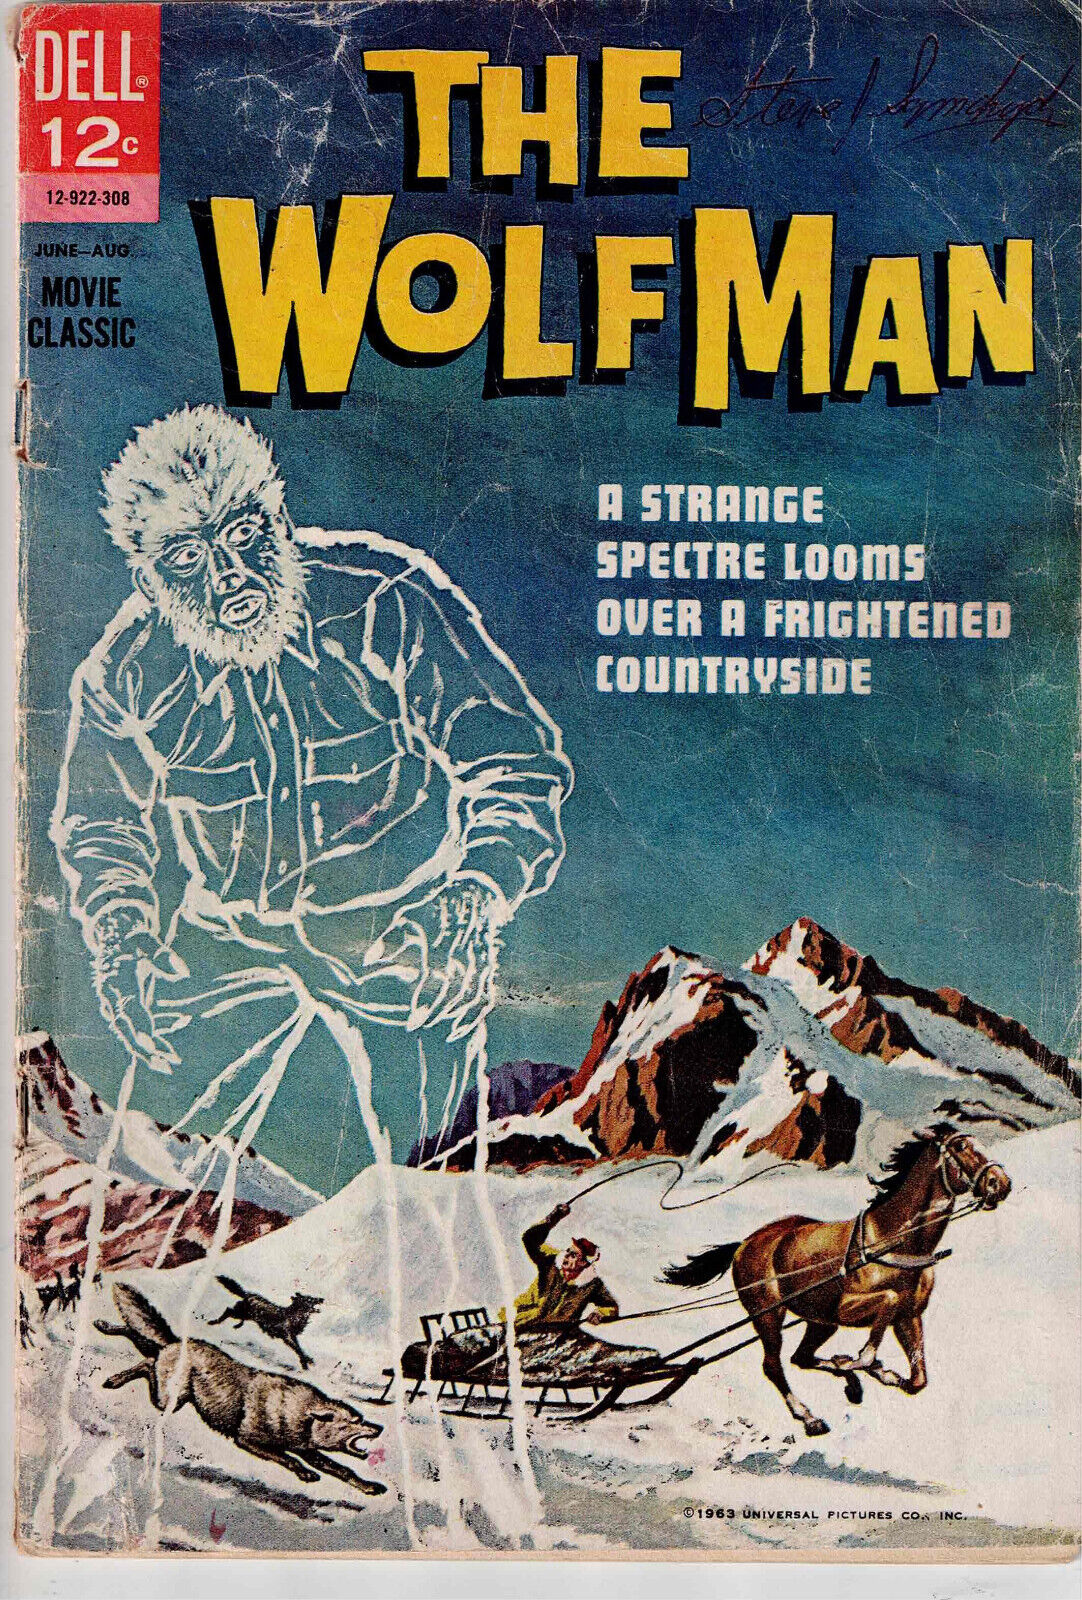 THE WOLF MAN #1 (1963) 🔥🔥HARD TO FIND 1ST PRINT 12-922-308🔥🔥